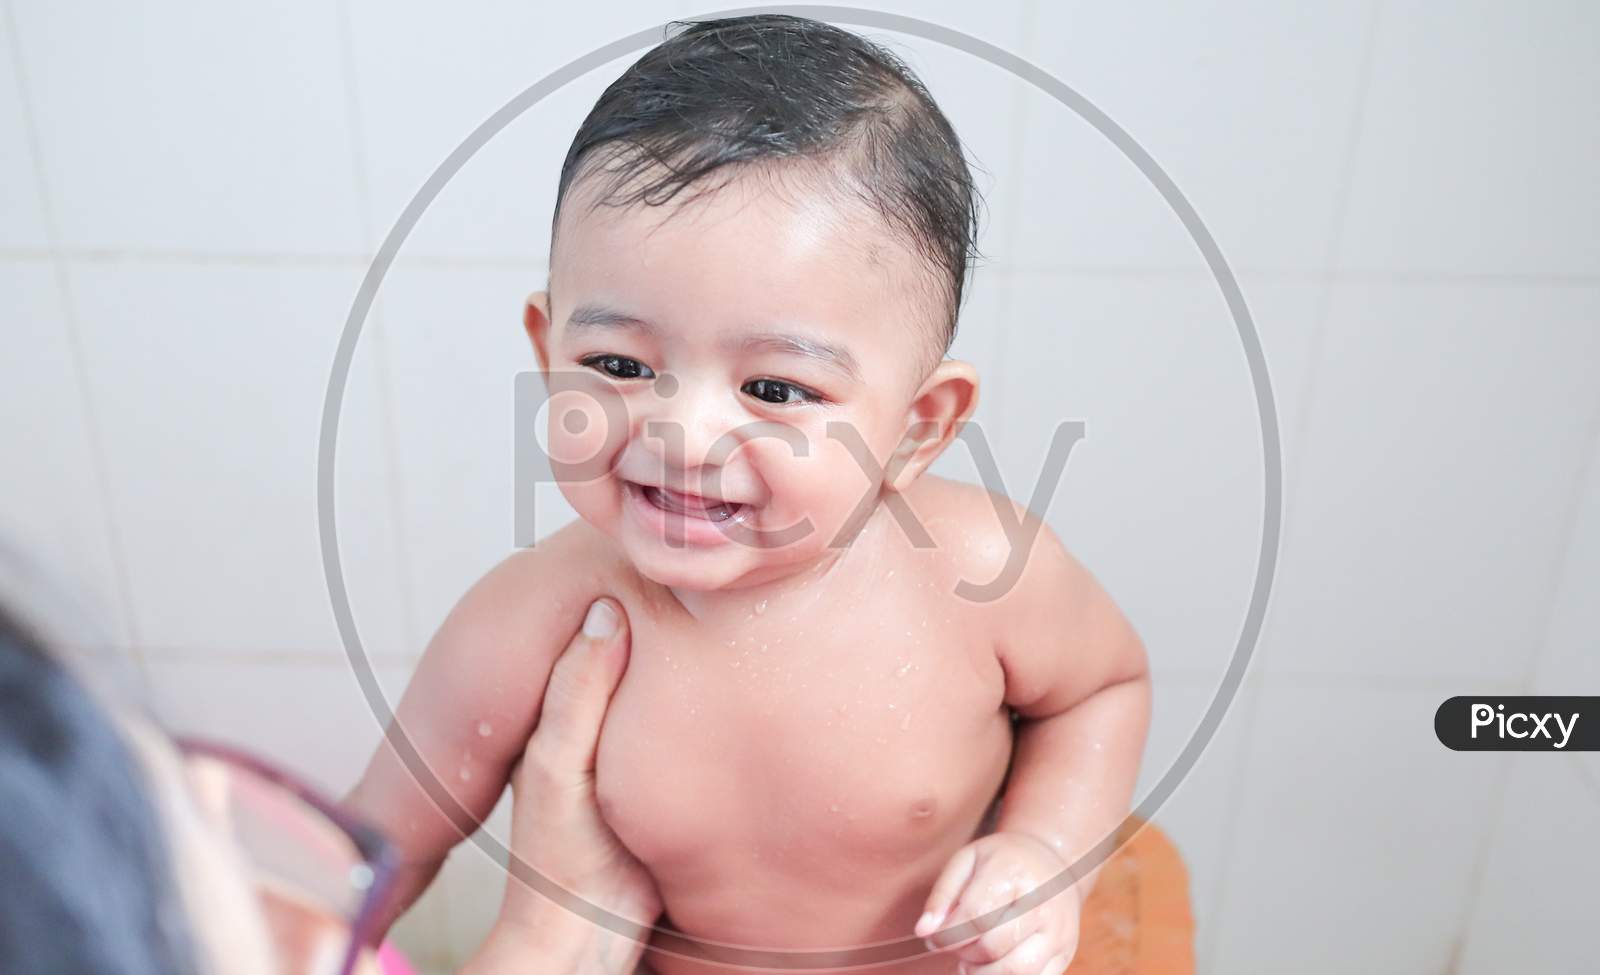 A Cute Indian Innocent New Born Baby In A Jovial Mood With A Charming Smile With Drops Of Water On His Body During Shower